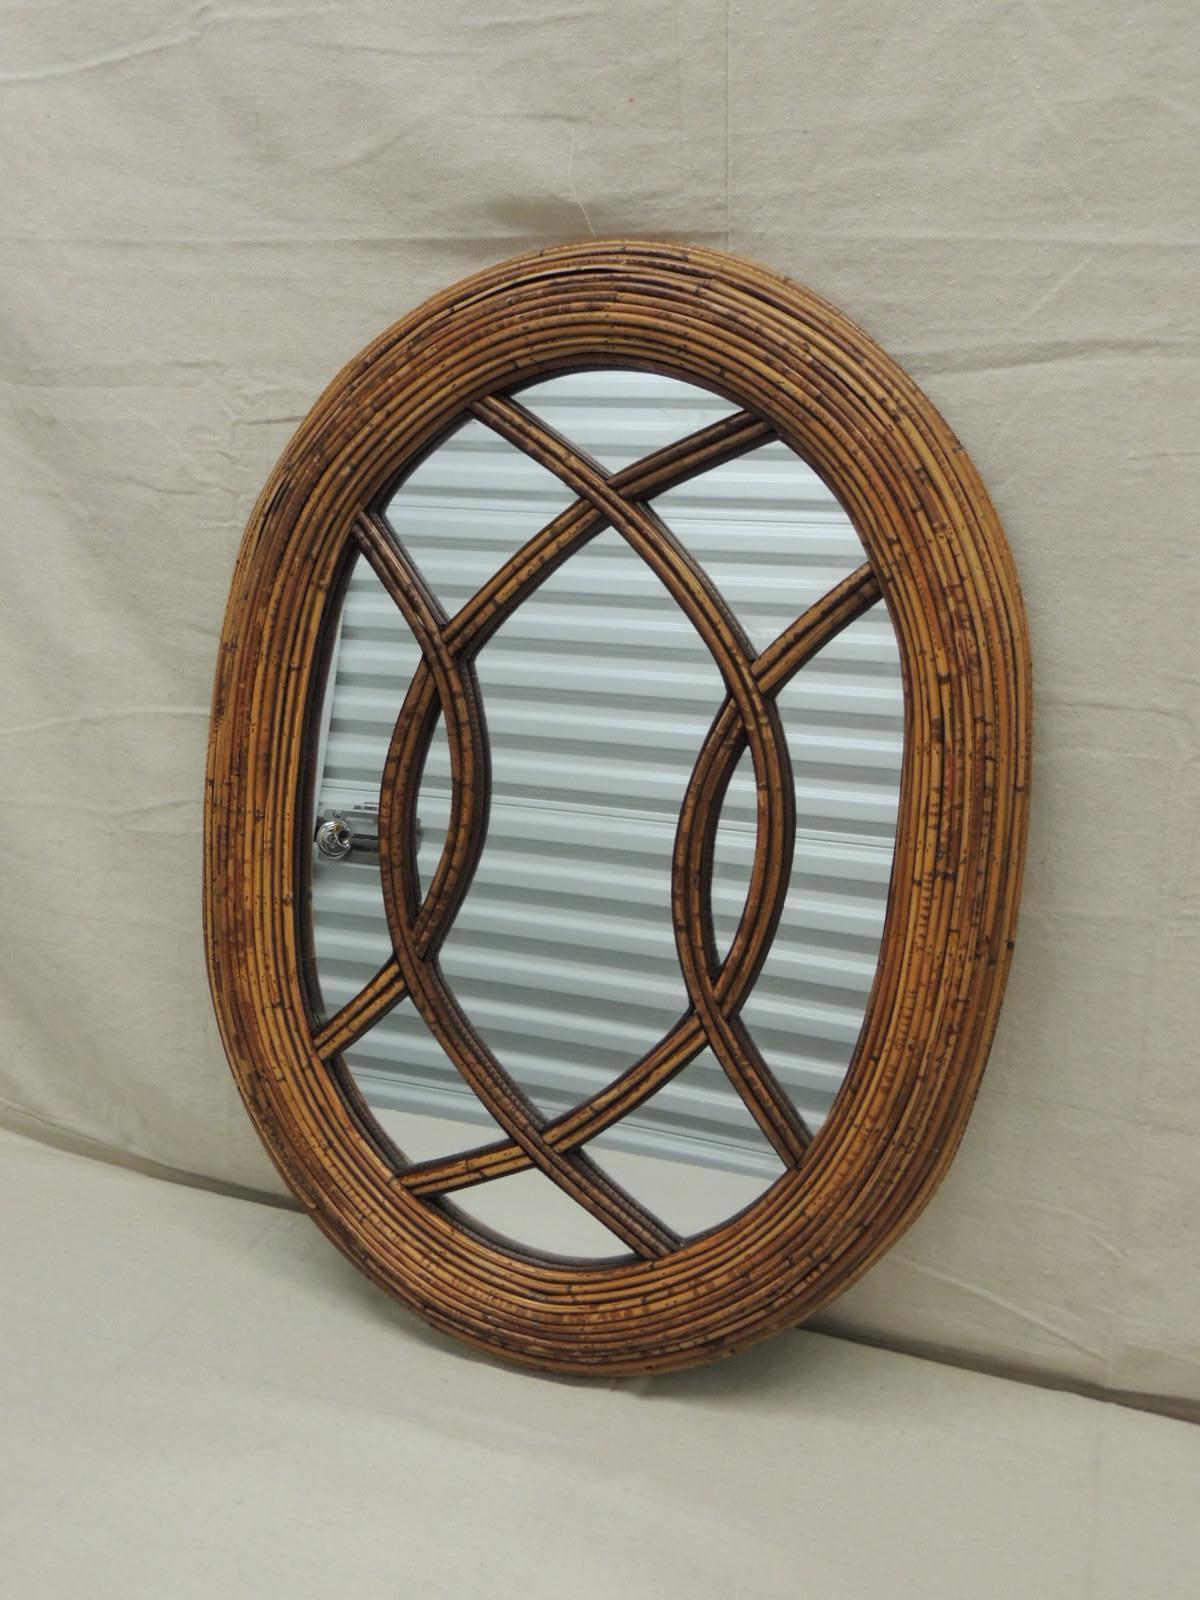 Balinese Vintage Oval Woven Bamboo and Rattan Decorative Wall Mirror